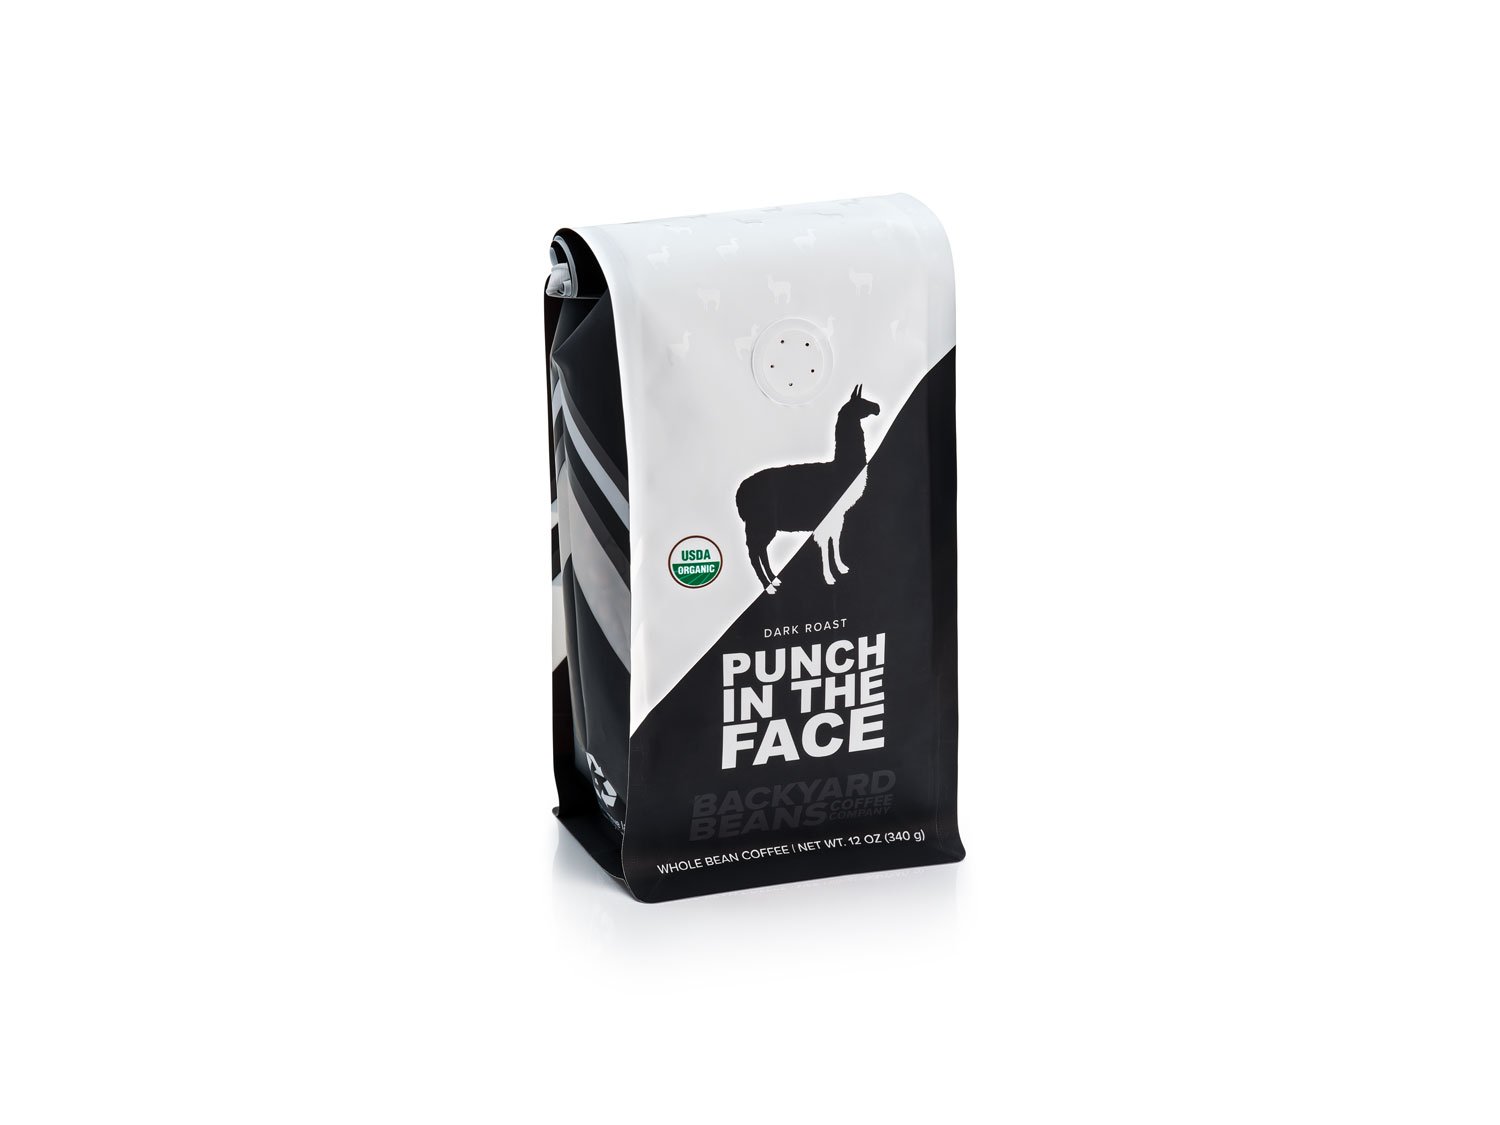 Image of Punch in the Face - Organic coffee bag.